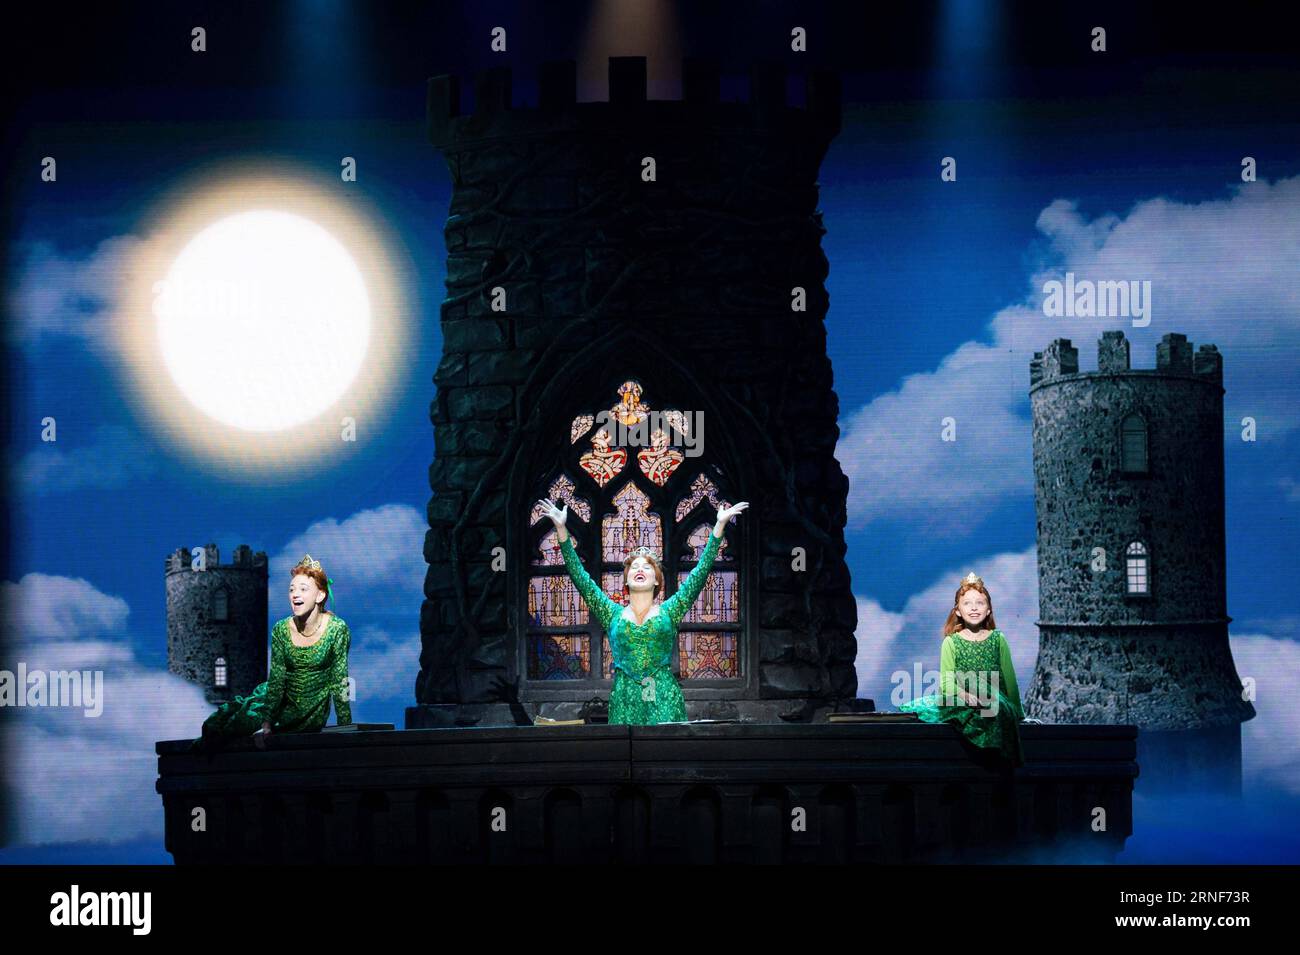 (160722) -- MACAO, July 22, 2016 -- Shrek the Musical is on shown in Macao Special Administrative Region, south China, July 22, 2016. A musical adapted from the smash hit movie Shrek comes to Macao from July 22 to August 7. This Broadway musical based on the DreamWorks Animation Motion Picture and the book by William Steig, will bring the animated story of a popular green ogre to real life. ) (wx) CHINA-MACAO-SHREK THE MUSICAL-DEBUT (CN) CheongxKamxKa PUBLICATIONxNOTxINxCHN   160722 Macao July 22 2016 Shrek The Musical IS ON Shown in Macao Special Administrative Region South China July 22 2016 Stock Photo